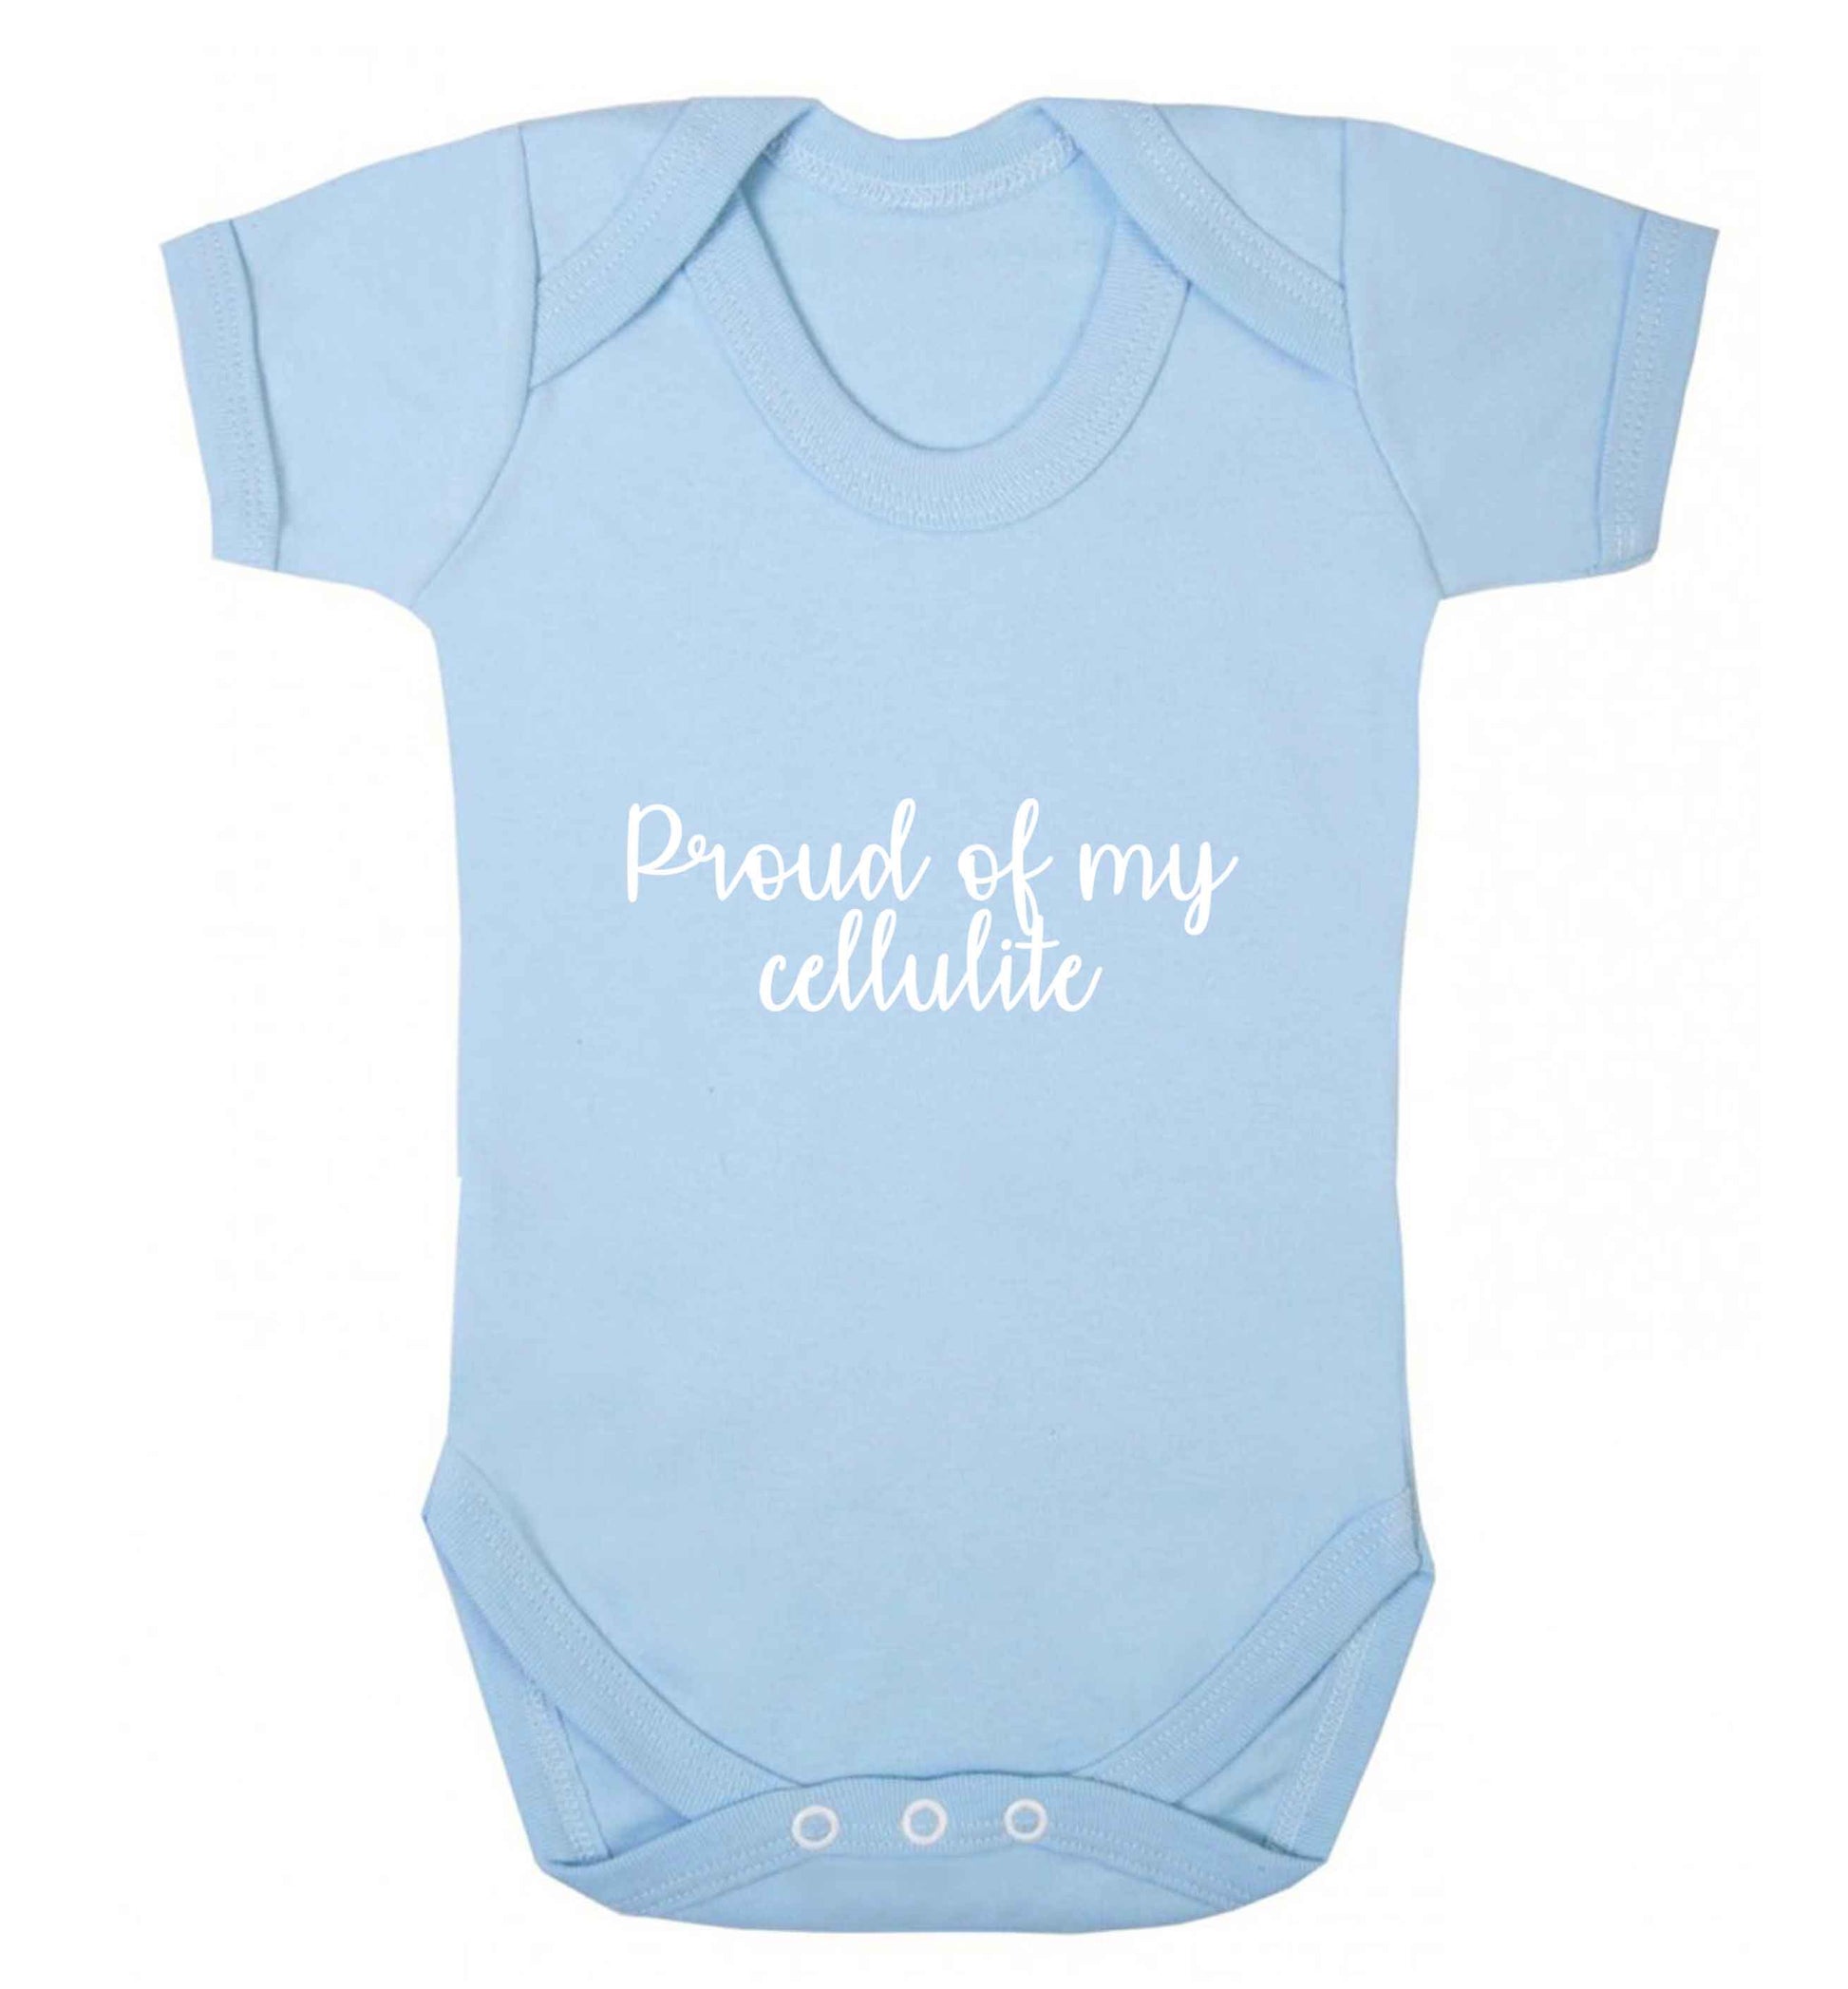 Proud of my cellulite baby vest pale blue 18-24 months